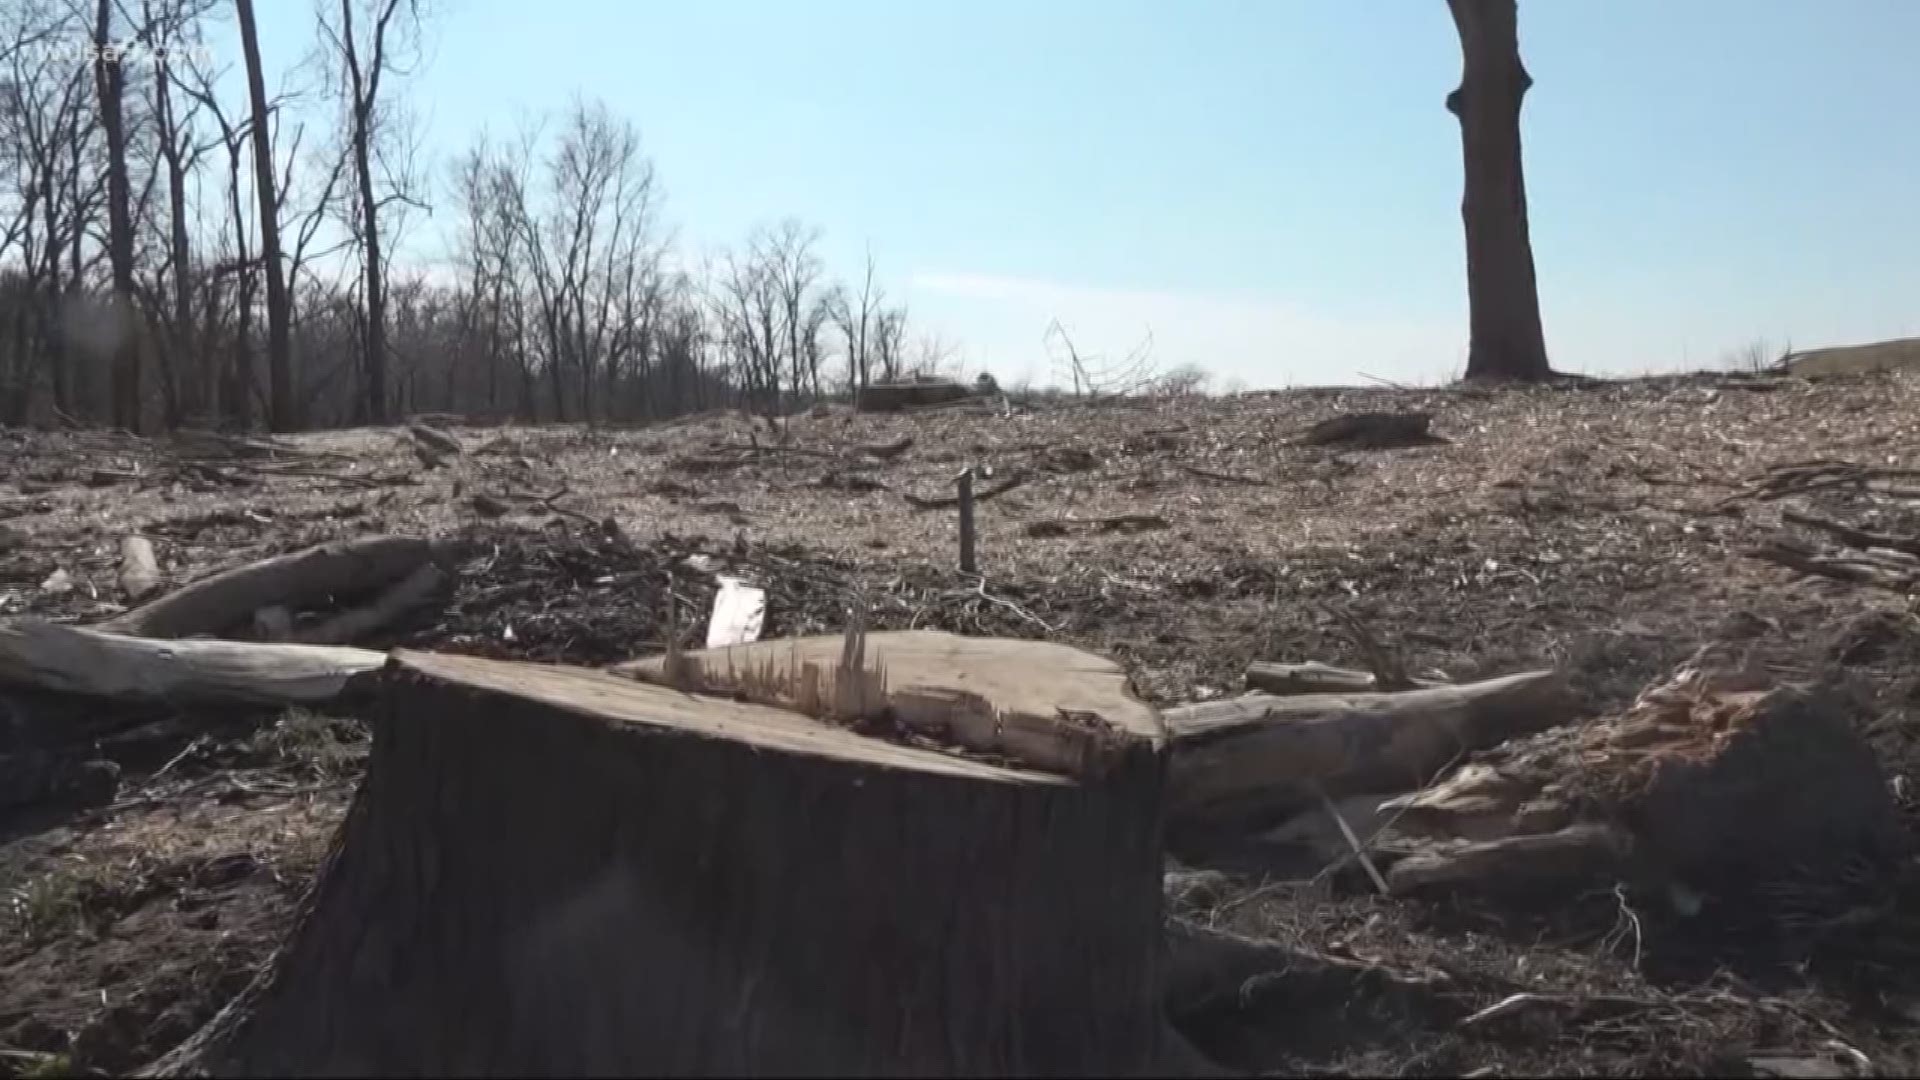 Loudoun County authorities say they are investigating the possibility that the controversial clear-cutting of mature Potomac riverbank trees at the Trump National Golf Club has violated a local zoning ordinance to protect sensitive flood plain areas.